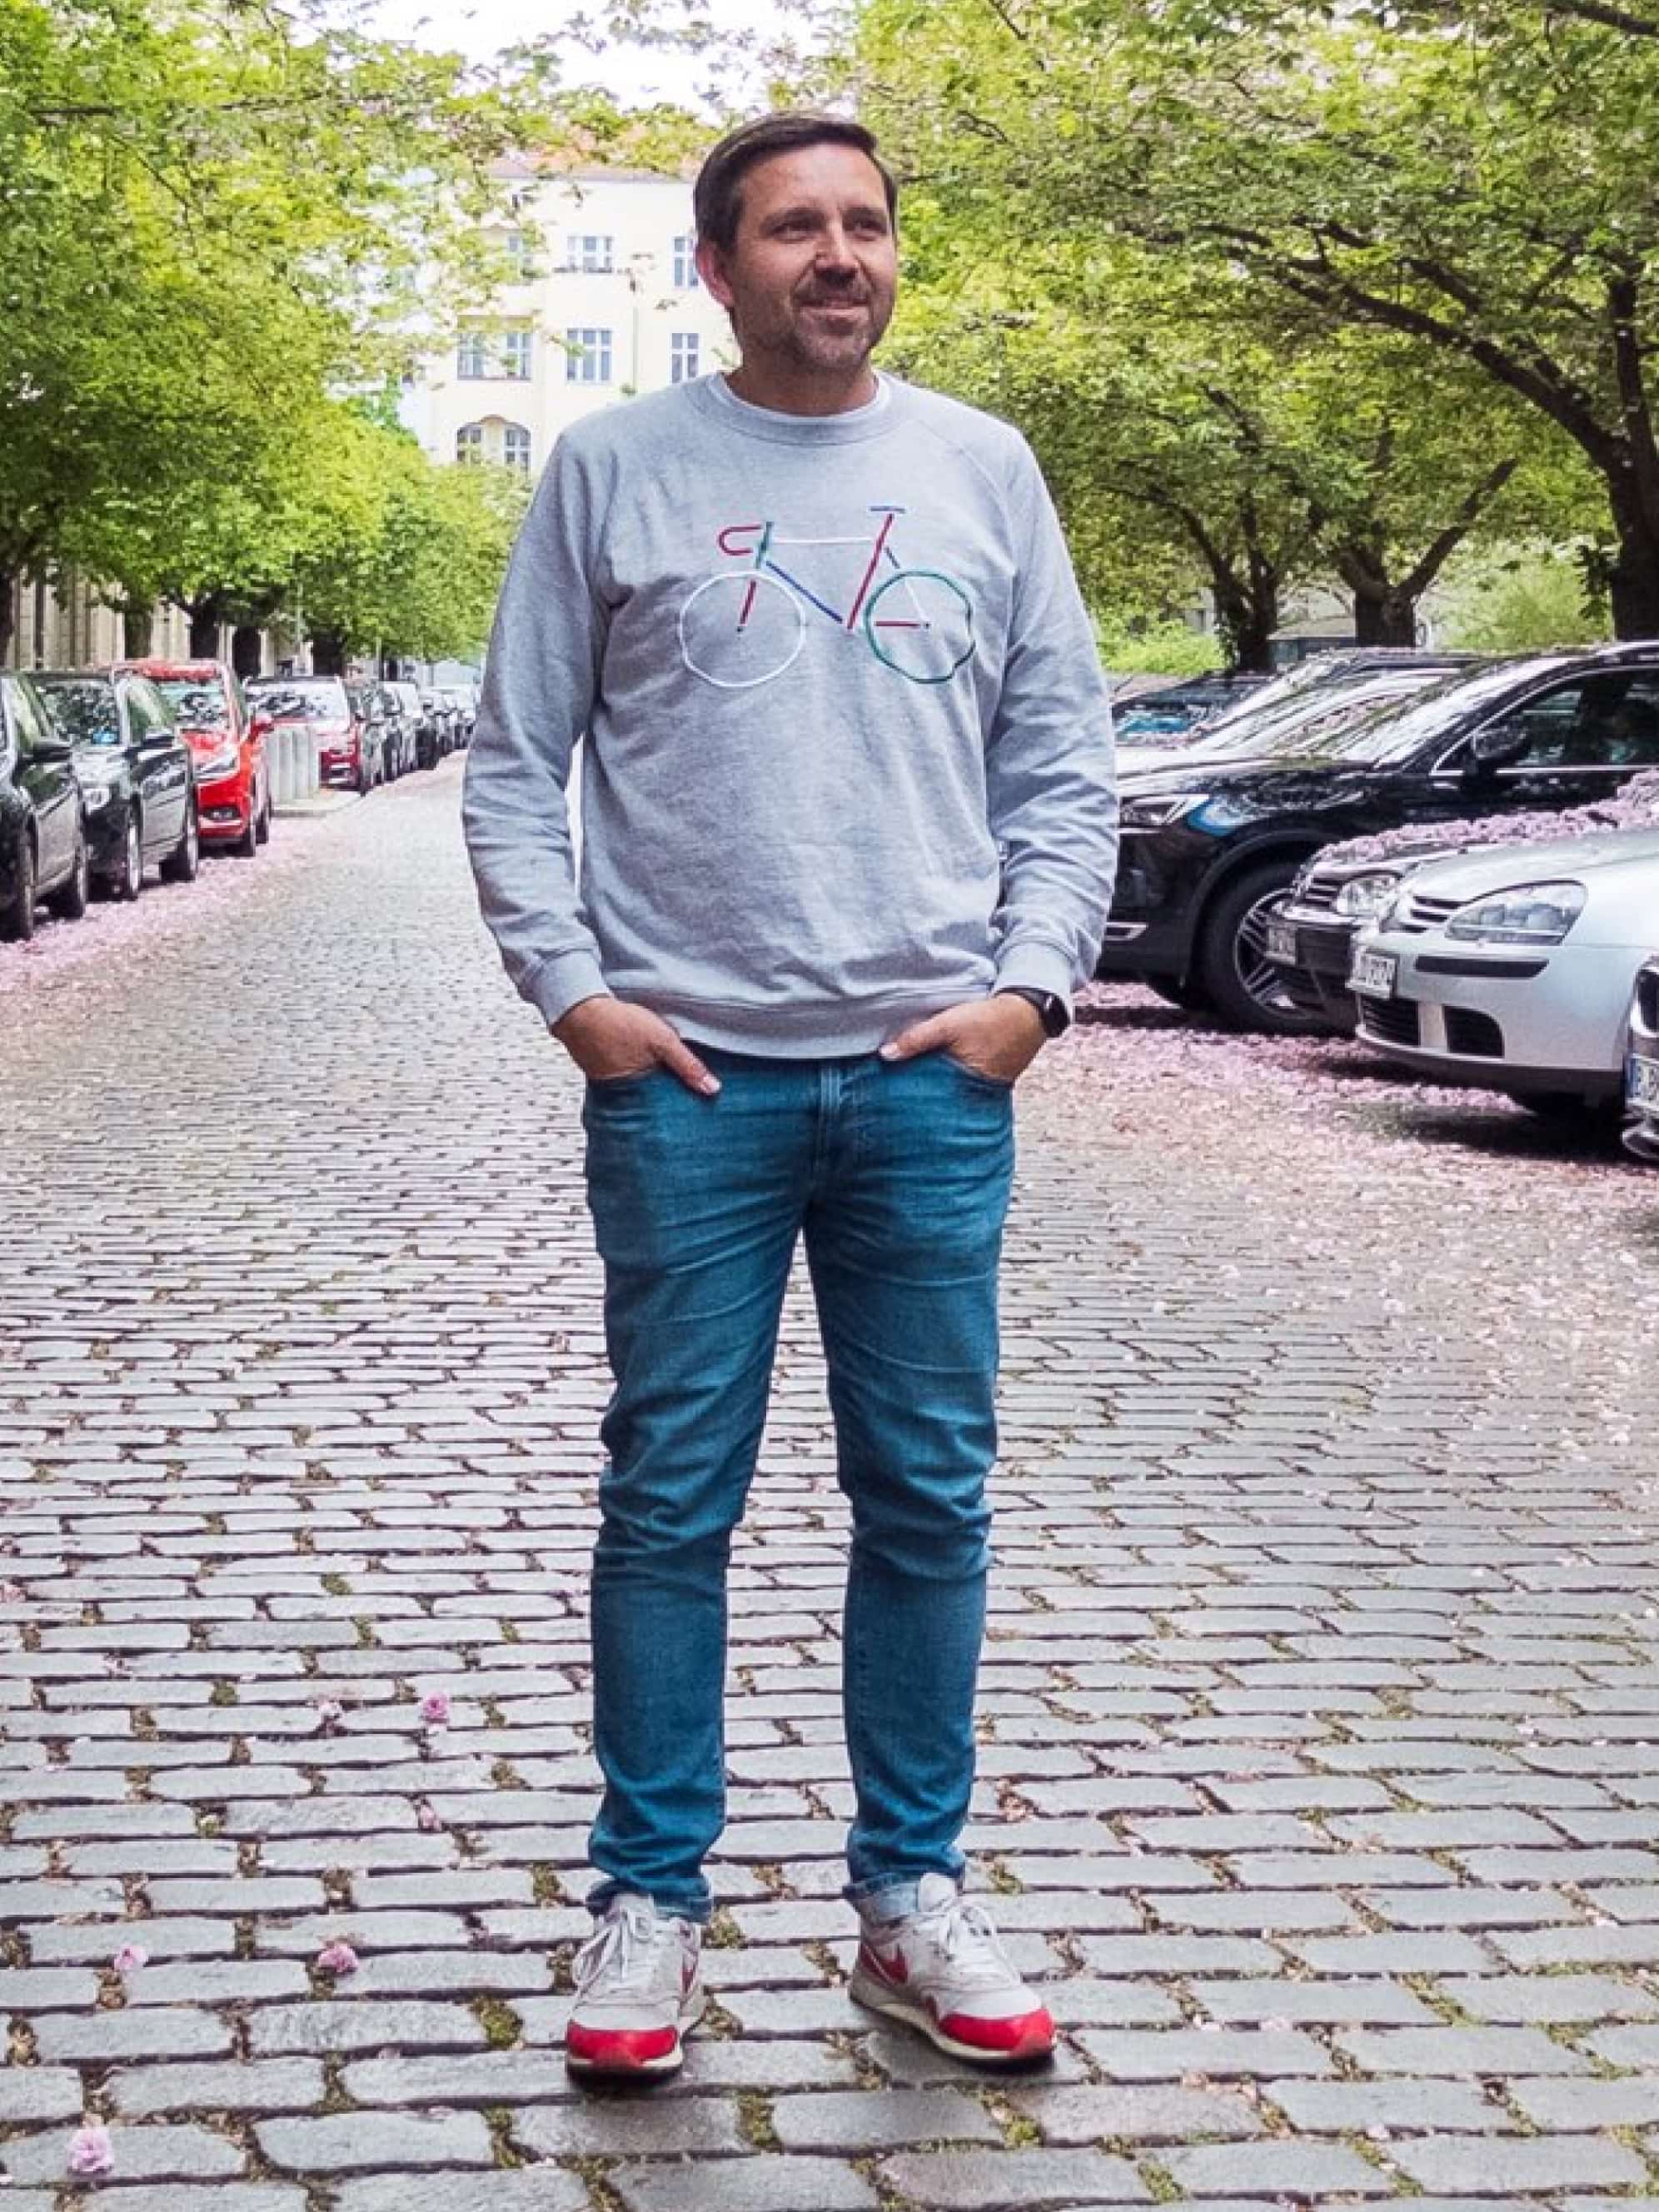 A man in a gray sweatshirt and jeans stands on a cobblestone street.